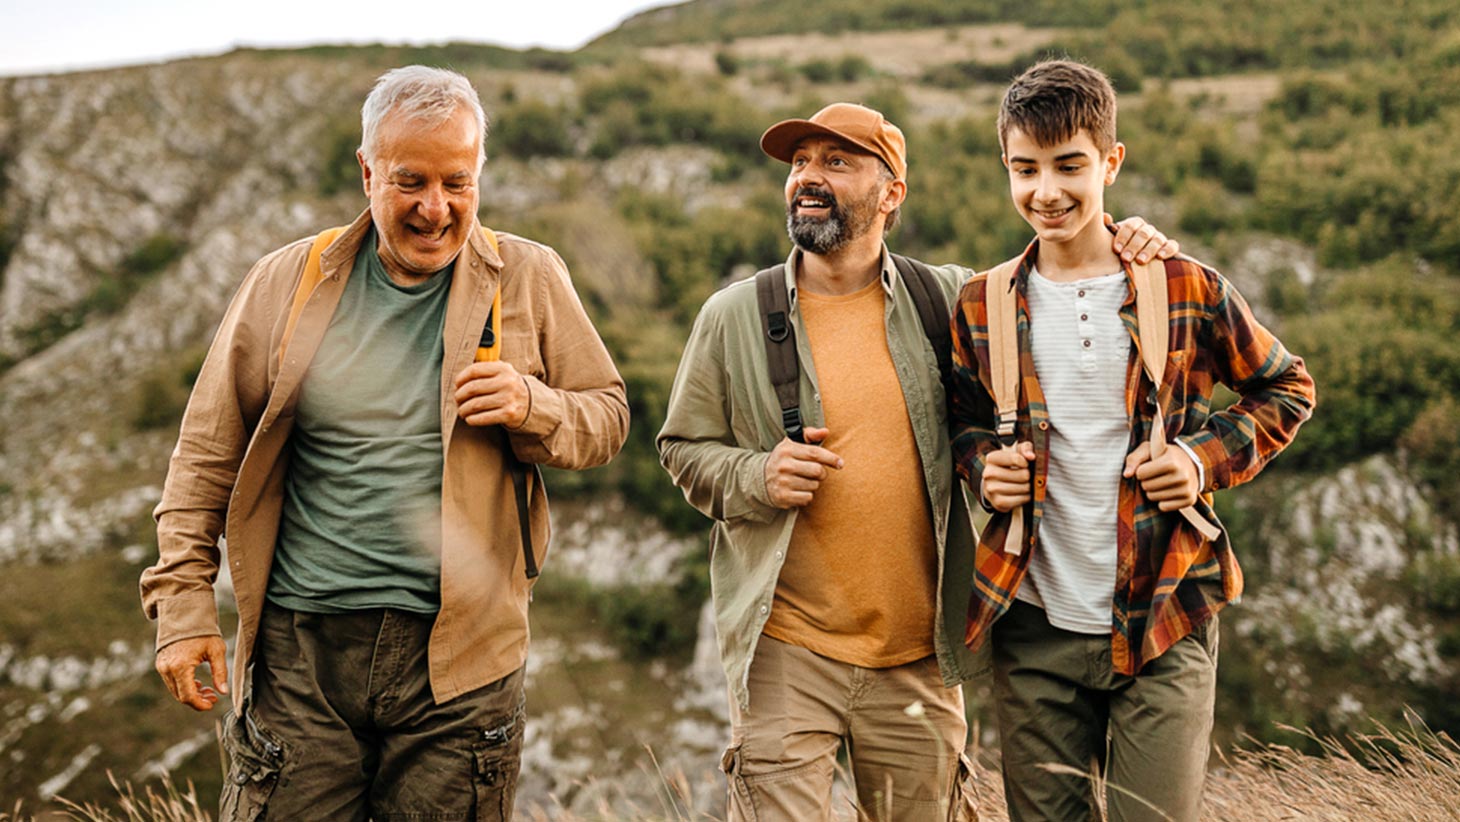 Happy older father with adult son and grandson out walking and admiring nature.